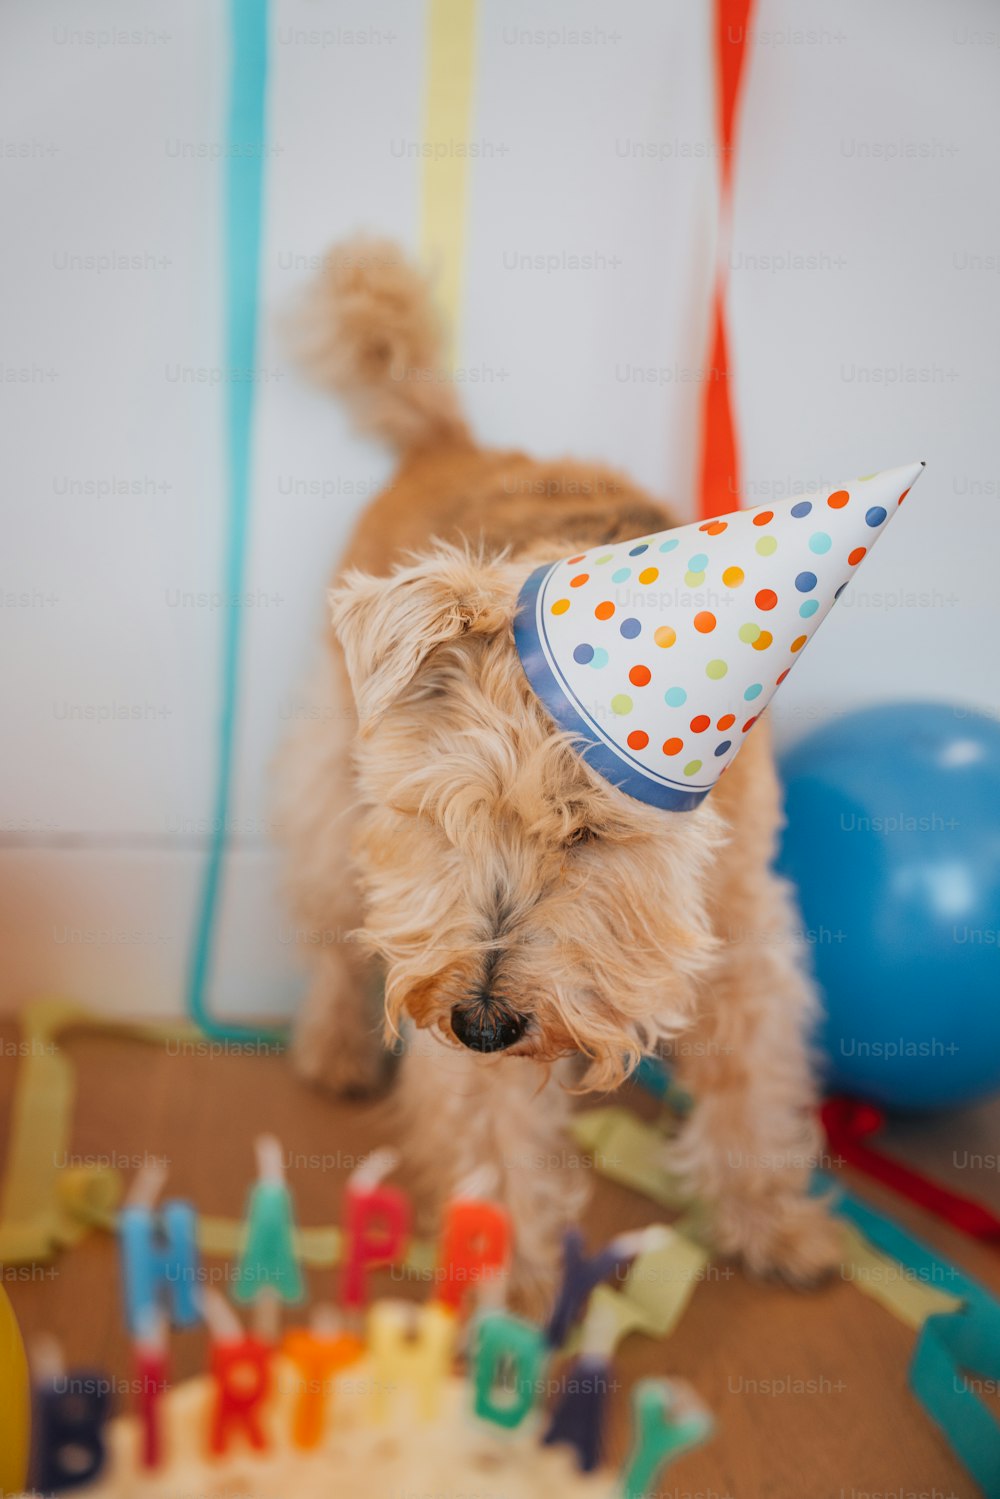 a small dog wearing a party hat standing in front of a birthday cake